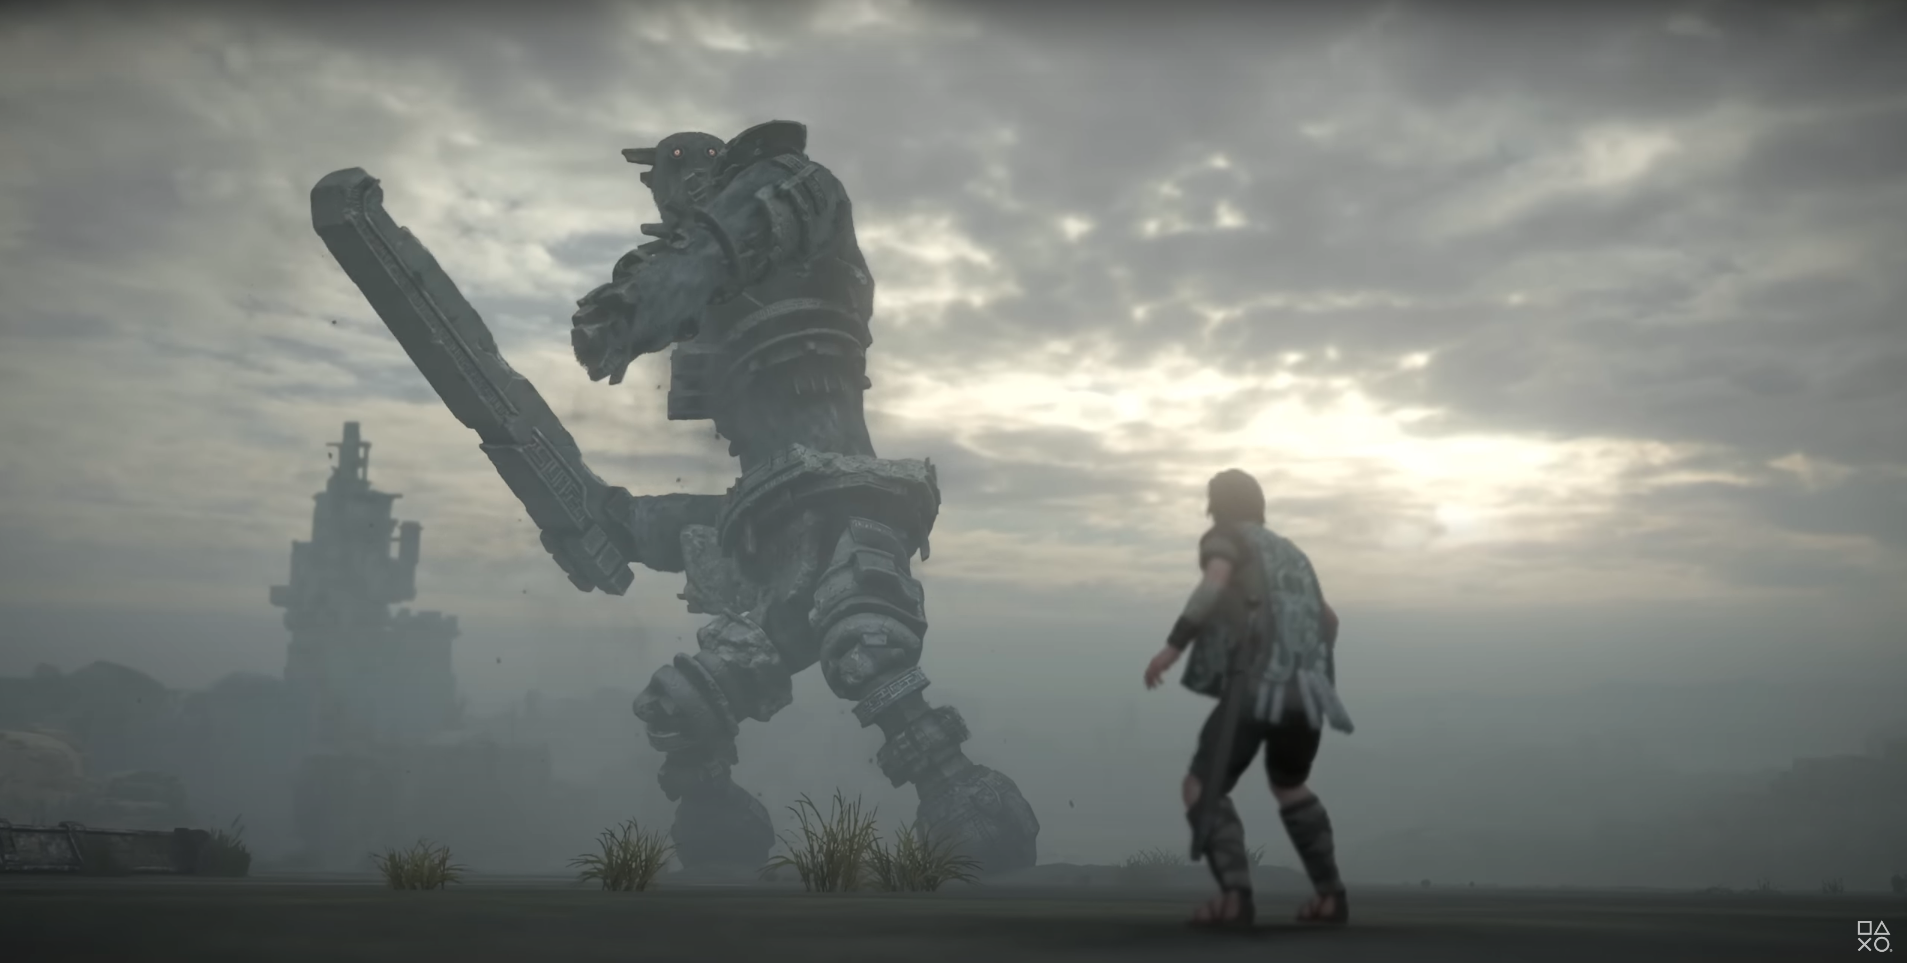 A screenshot from Shadow of the Colossus showing the hero Rogue fighting one of the game's colossi.